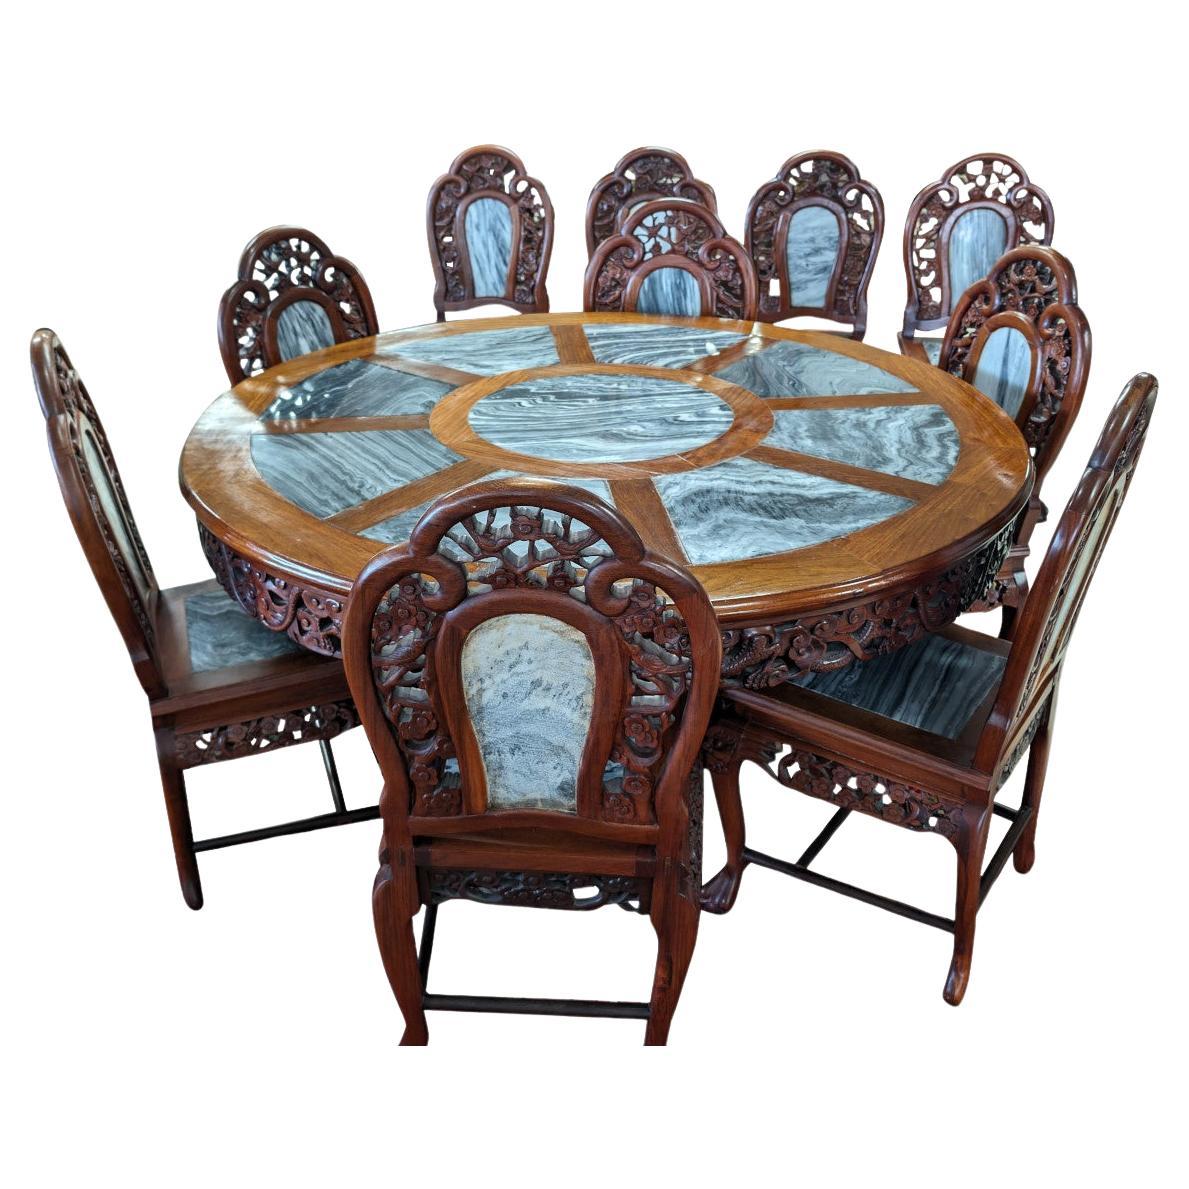 Vintage Stone Inlay Dining Table, 10 Chairs